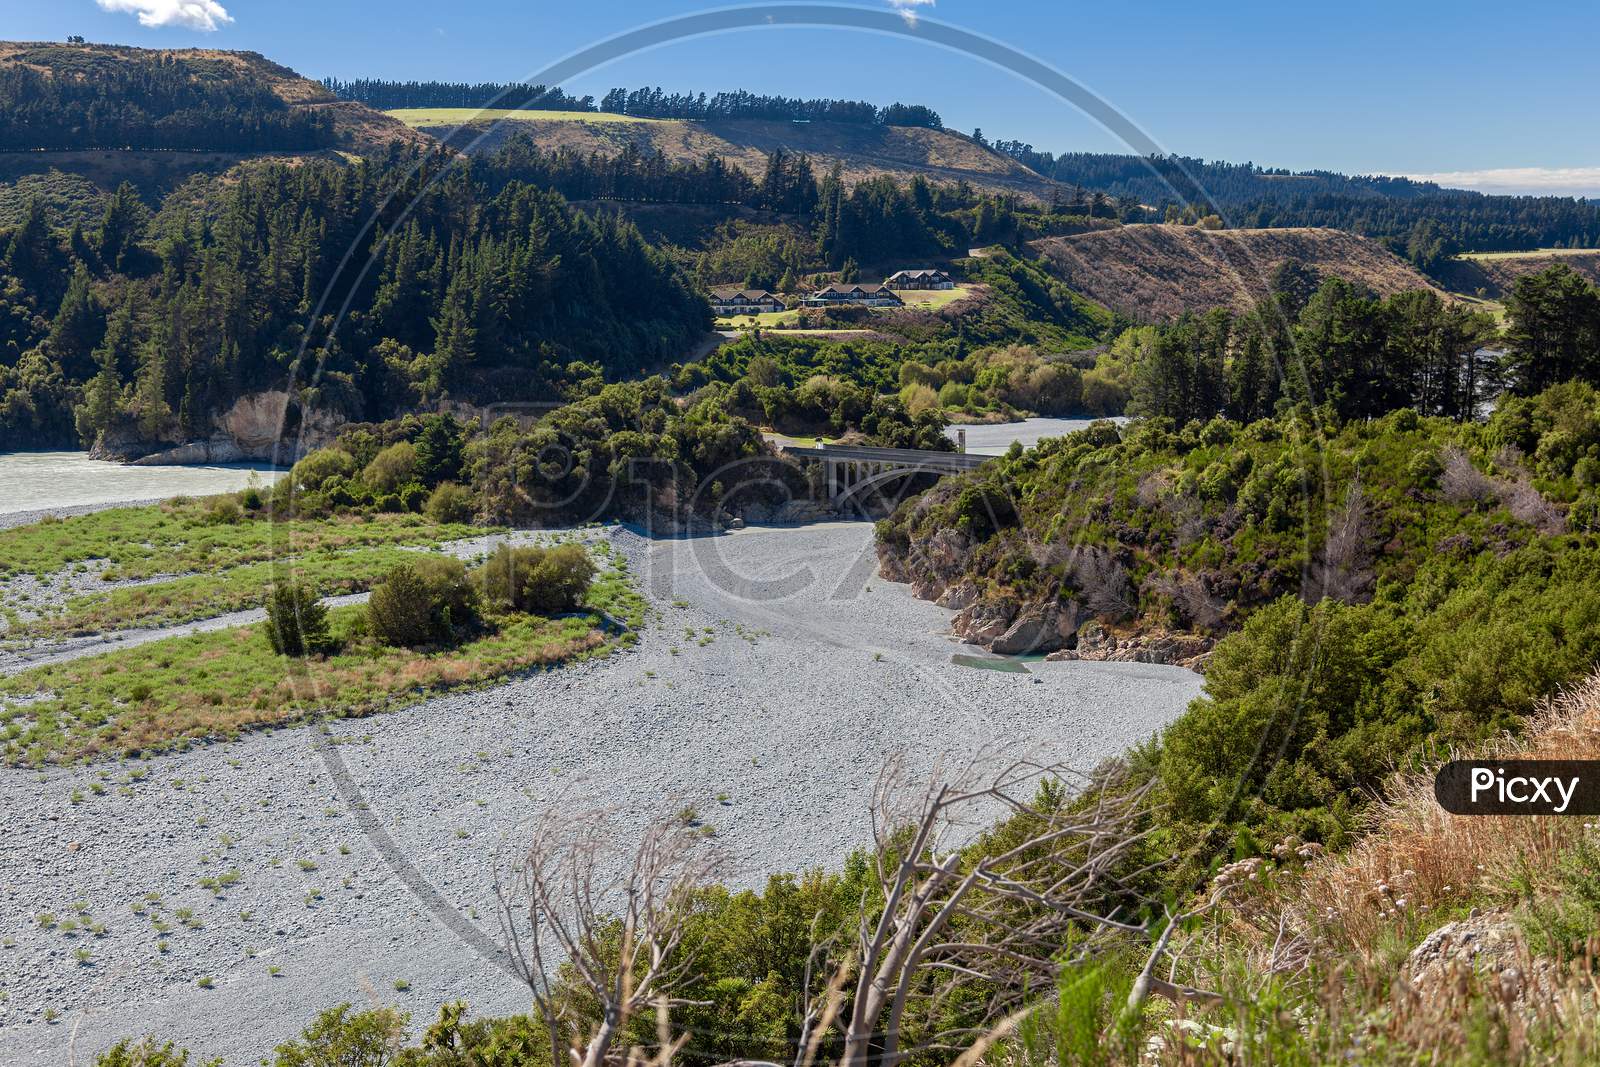 View Of The Dried Up Rakaia River Bed In Summertime